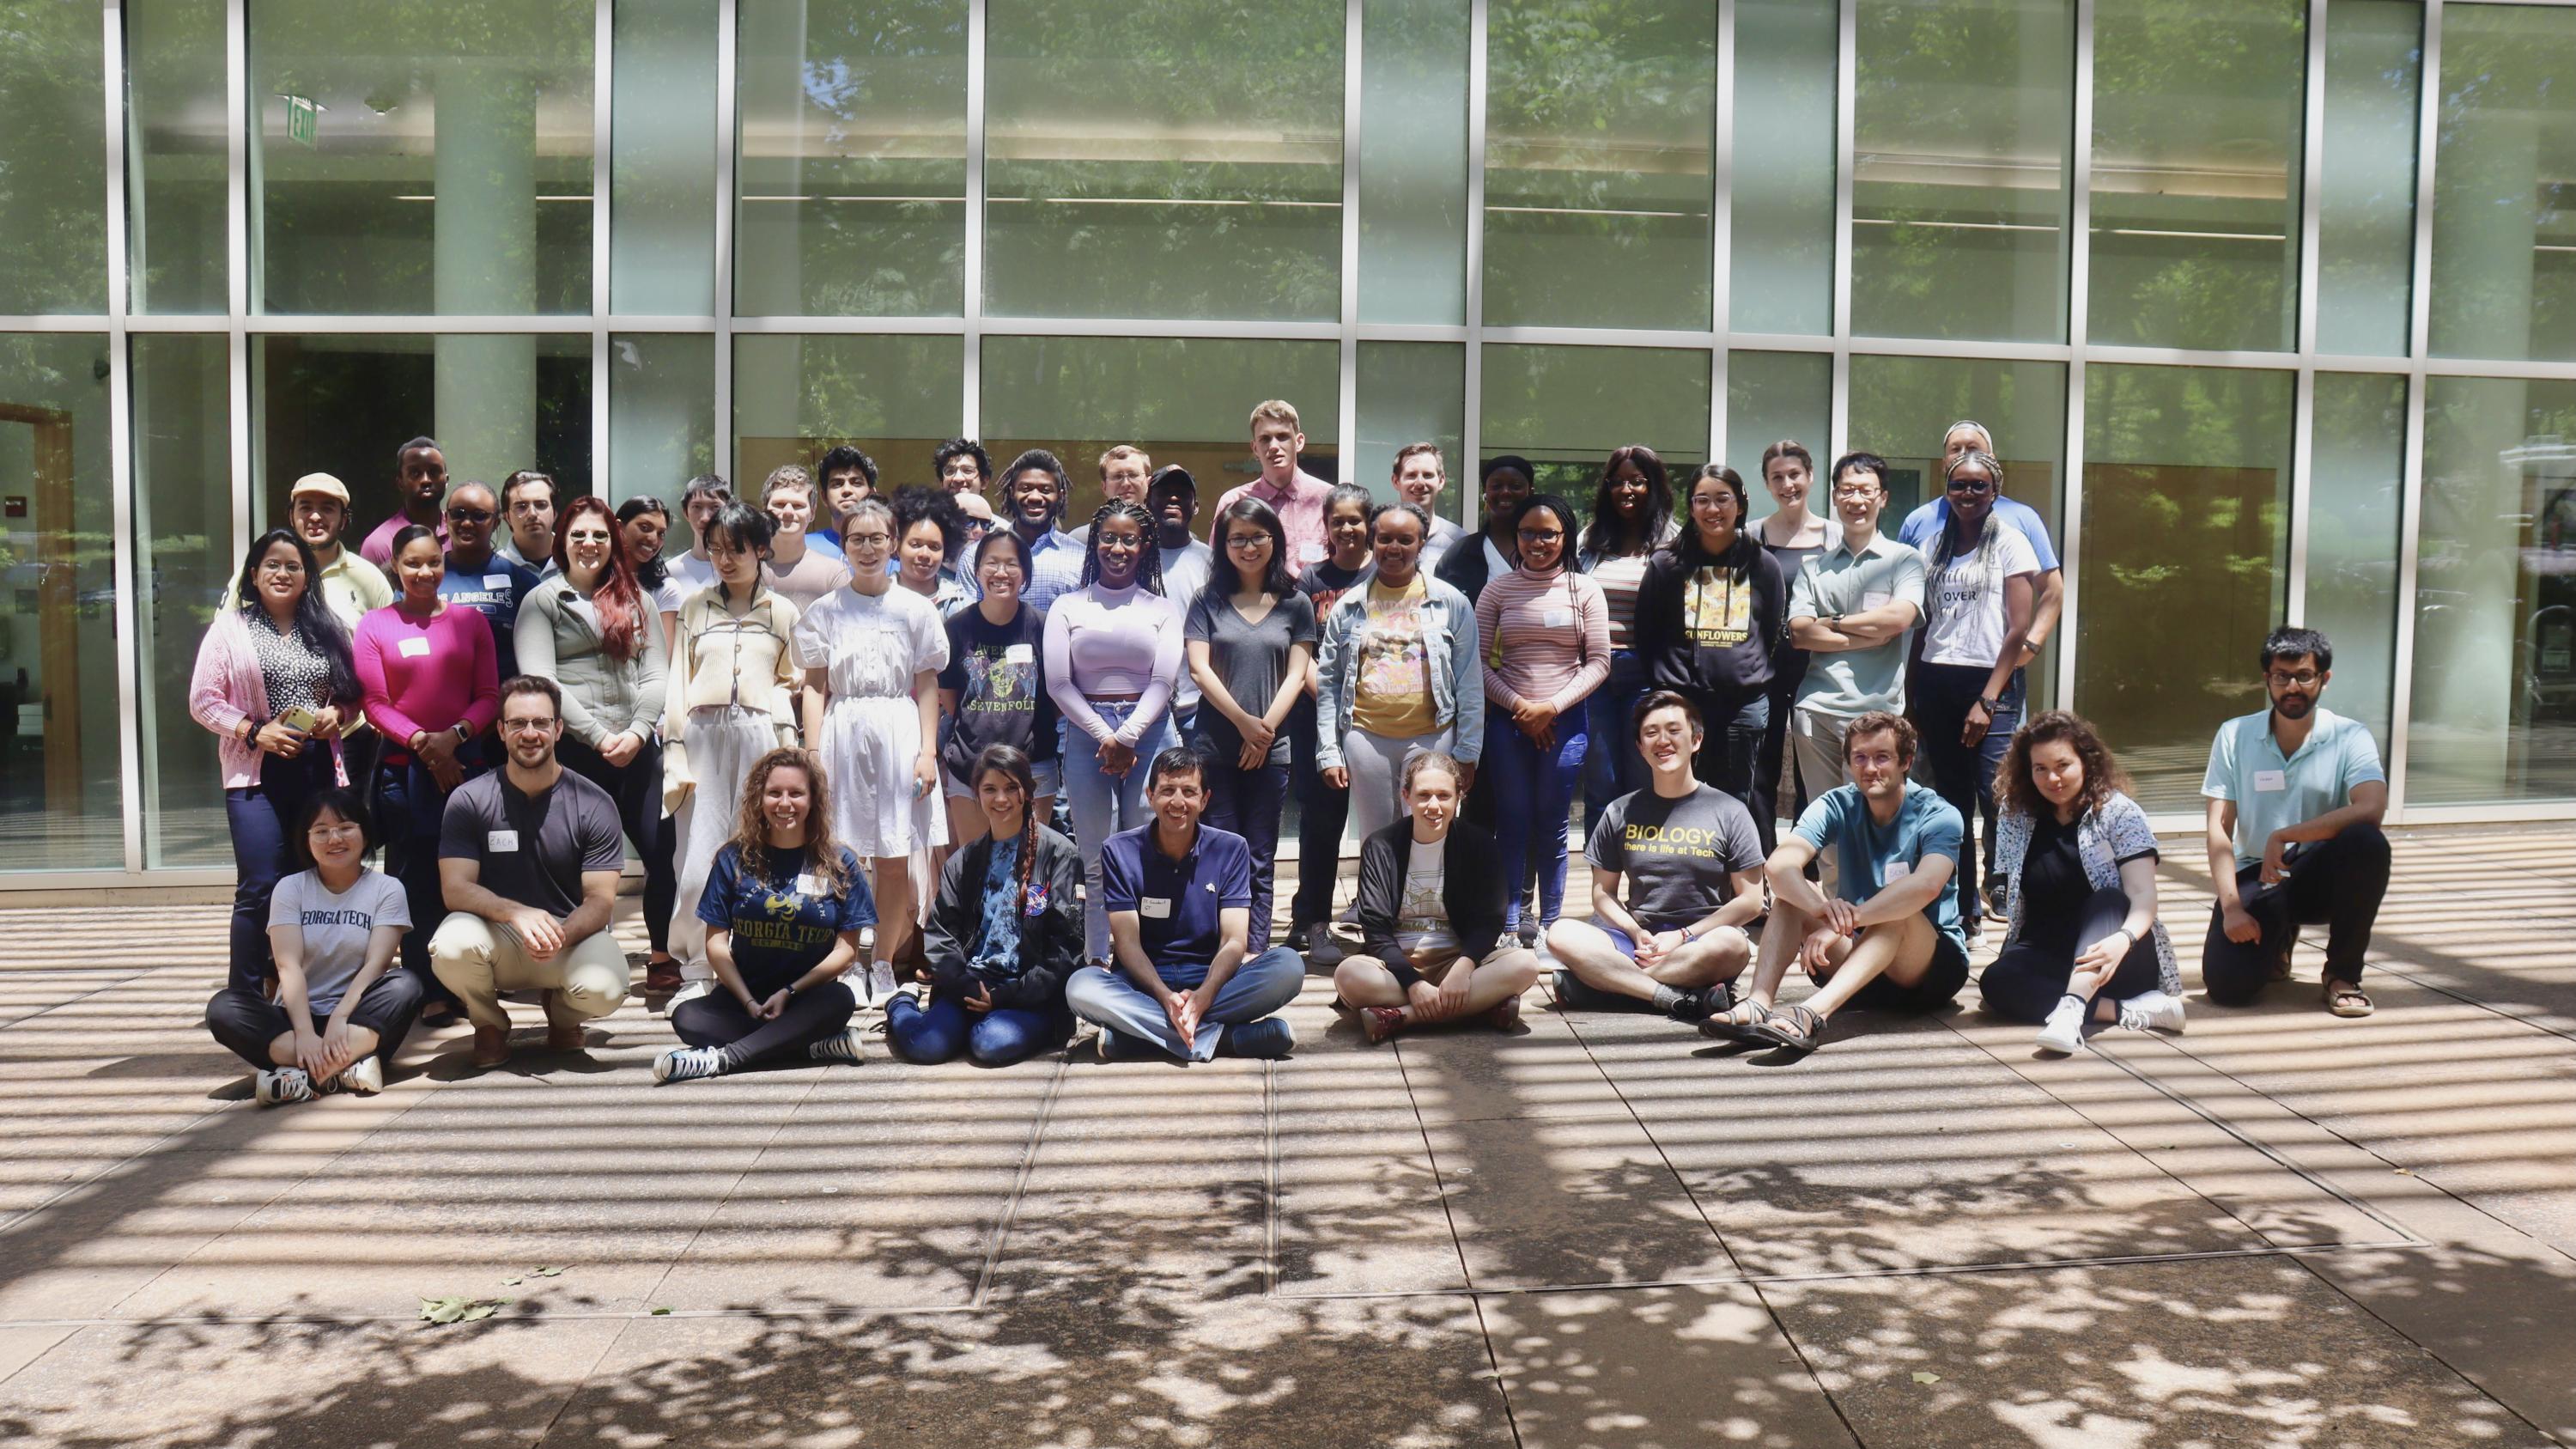 Organizers and attendees of the workshop gathered for a group photo.